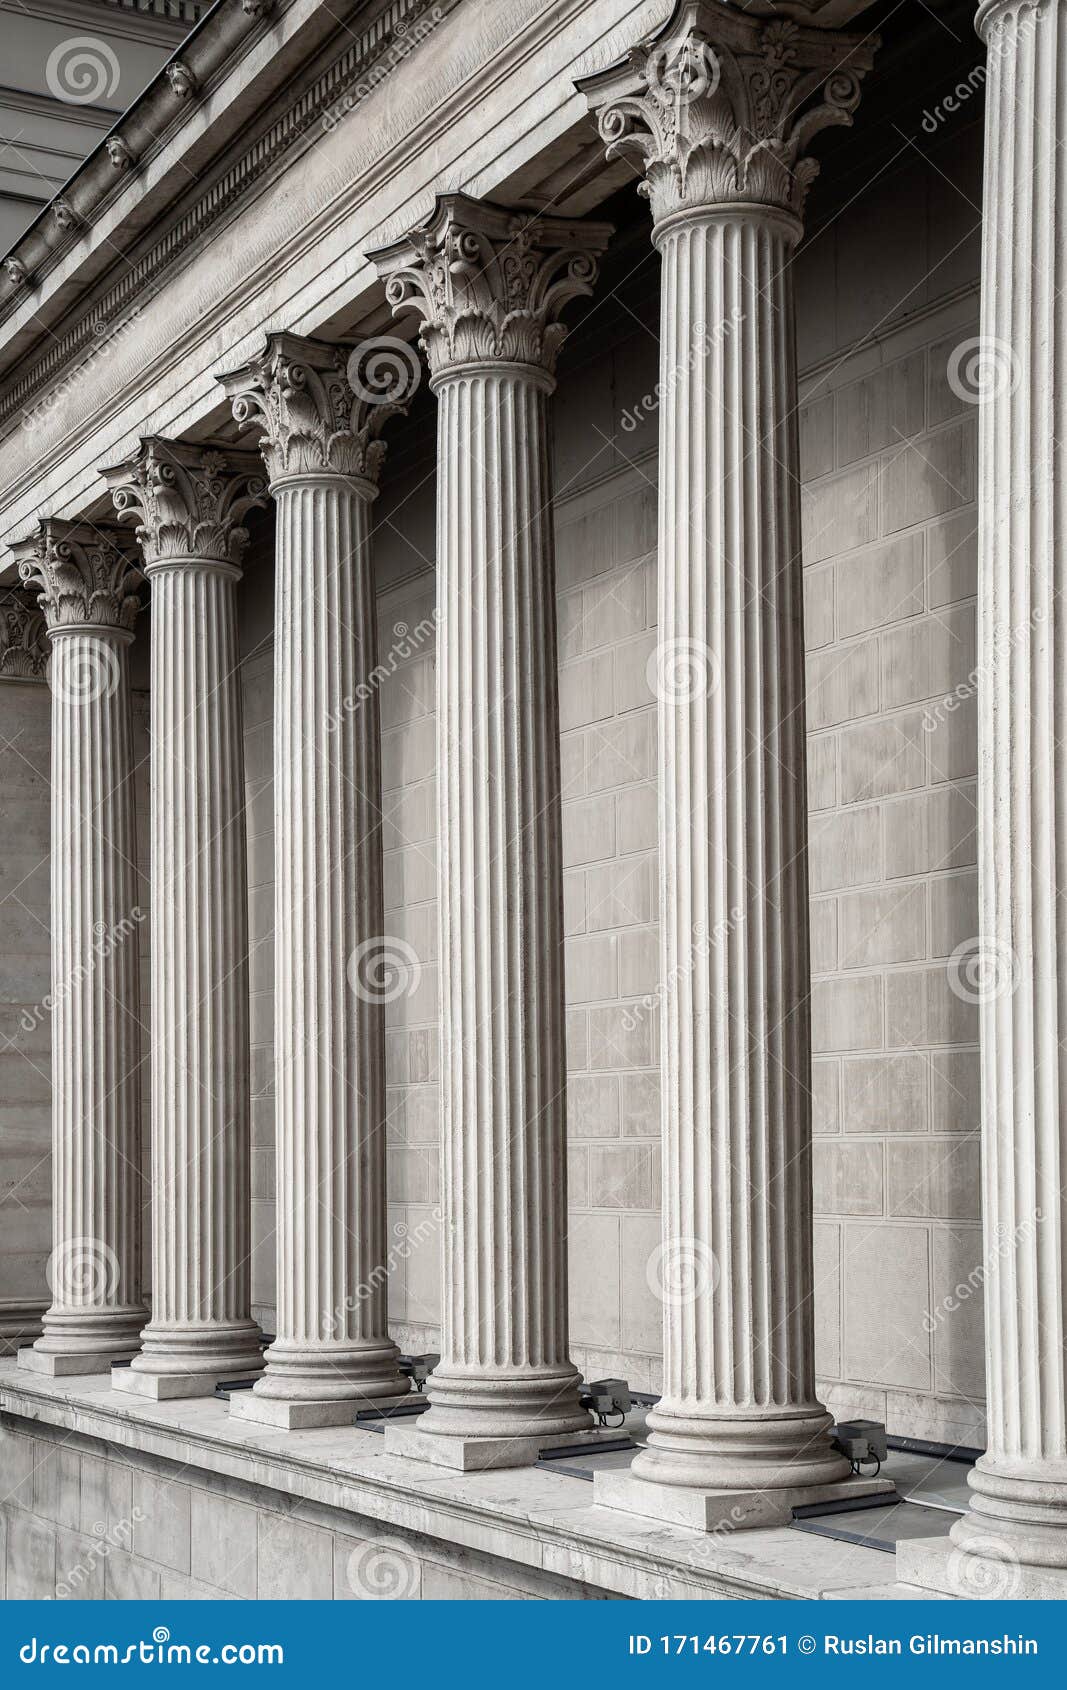 vintage old justice courthouse column. neoclassical colonnade with corinthian columns as part of a public building